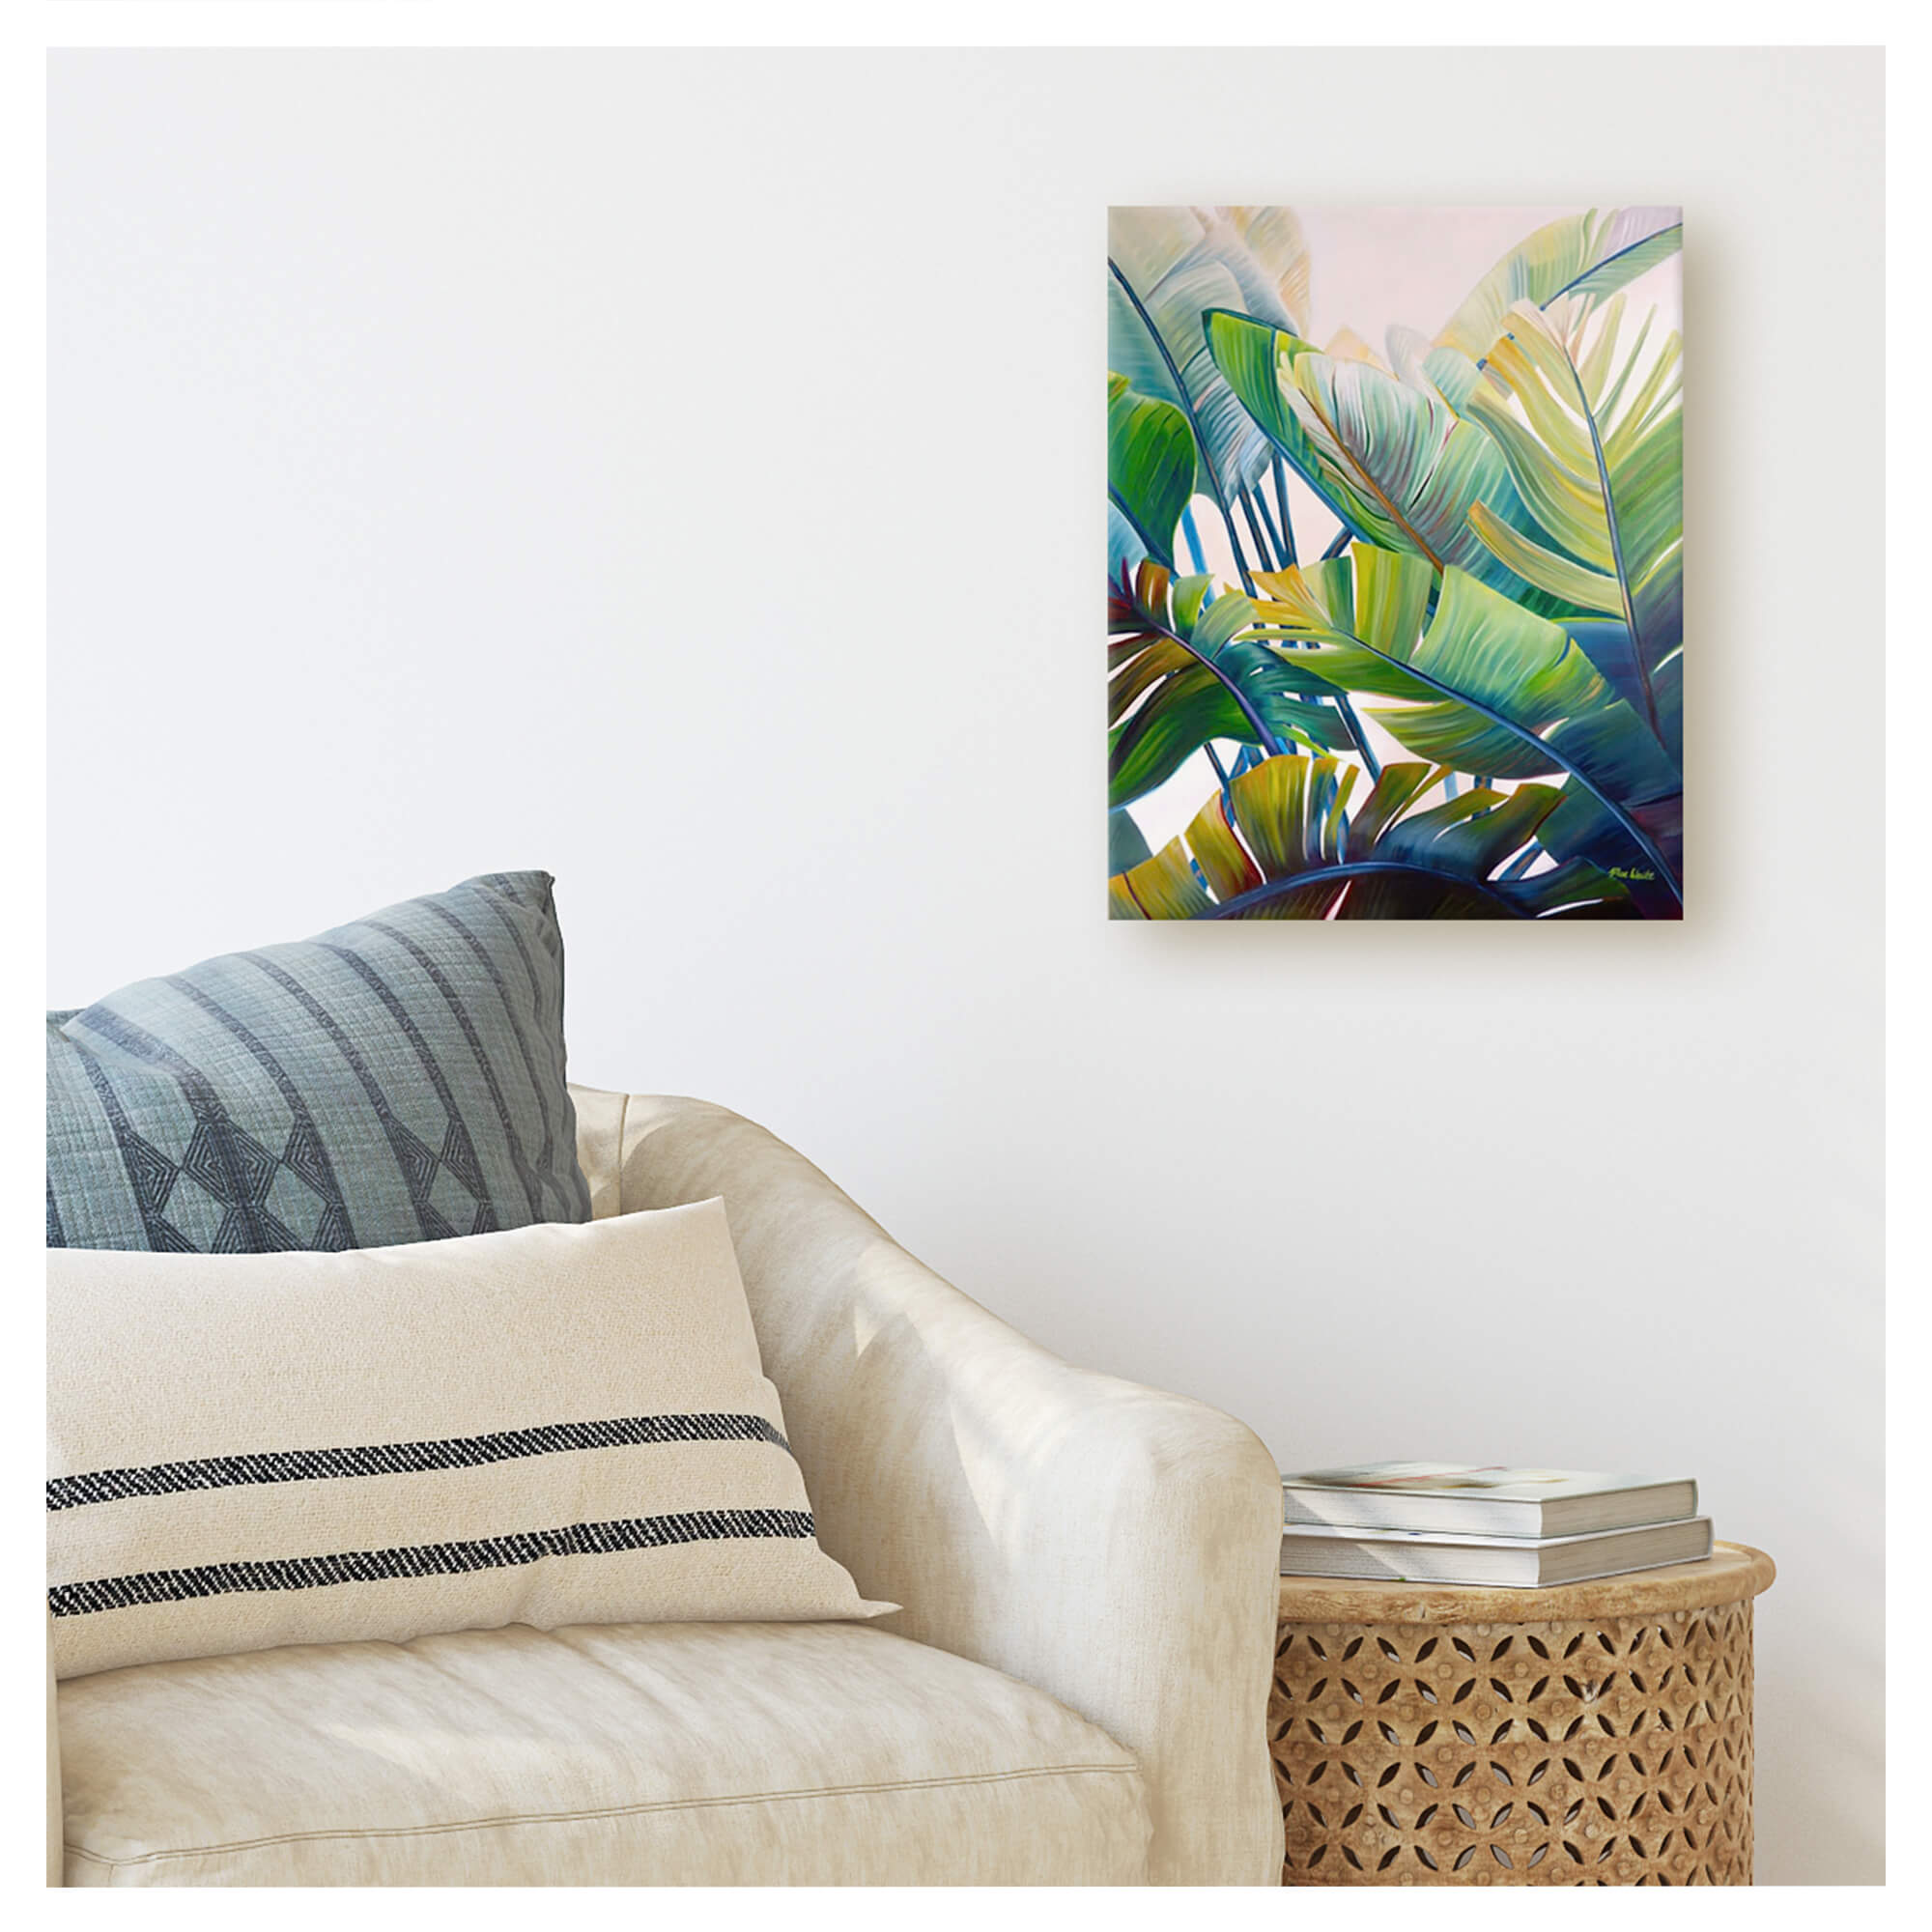 A canvas giclée art print of the lush fronds in tropical plants art by Hawaii artist Mae Waite